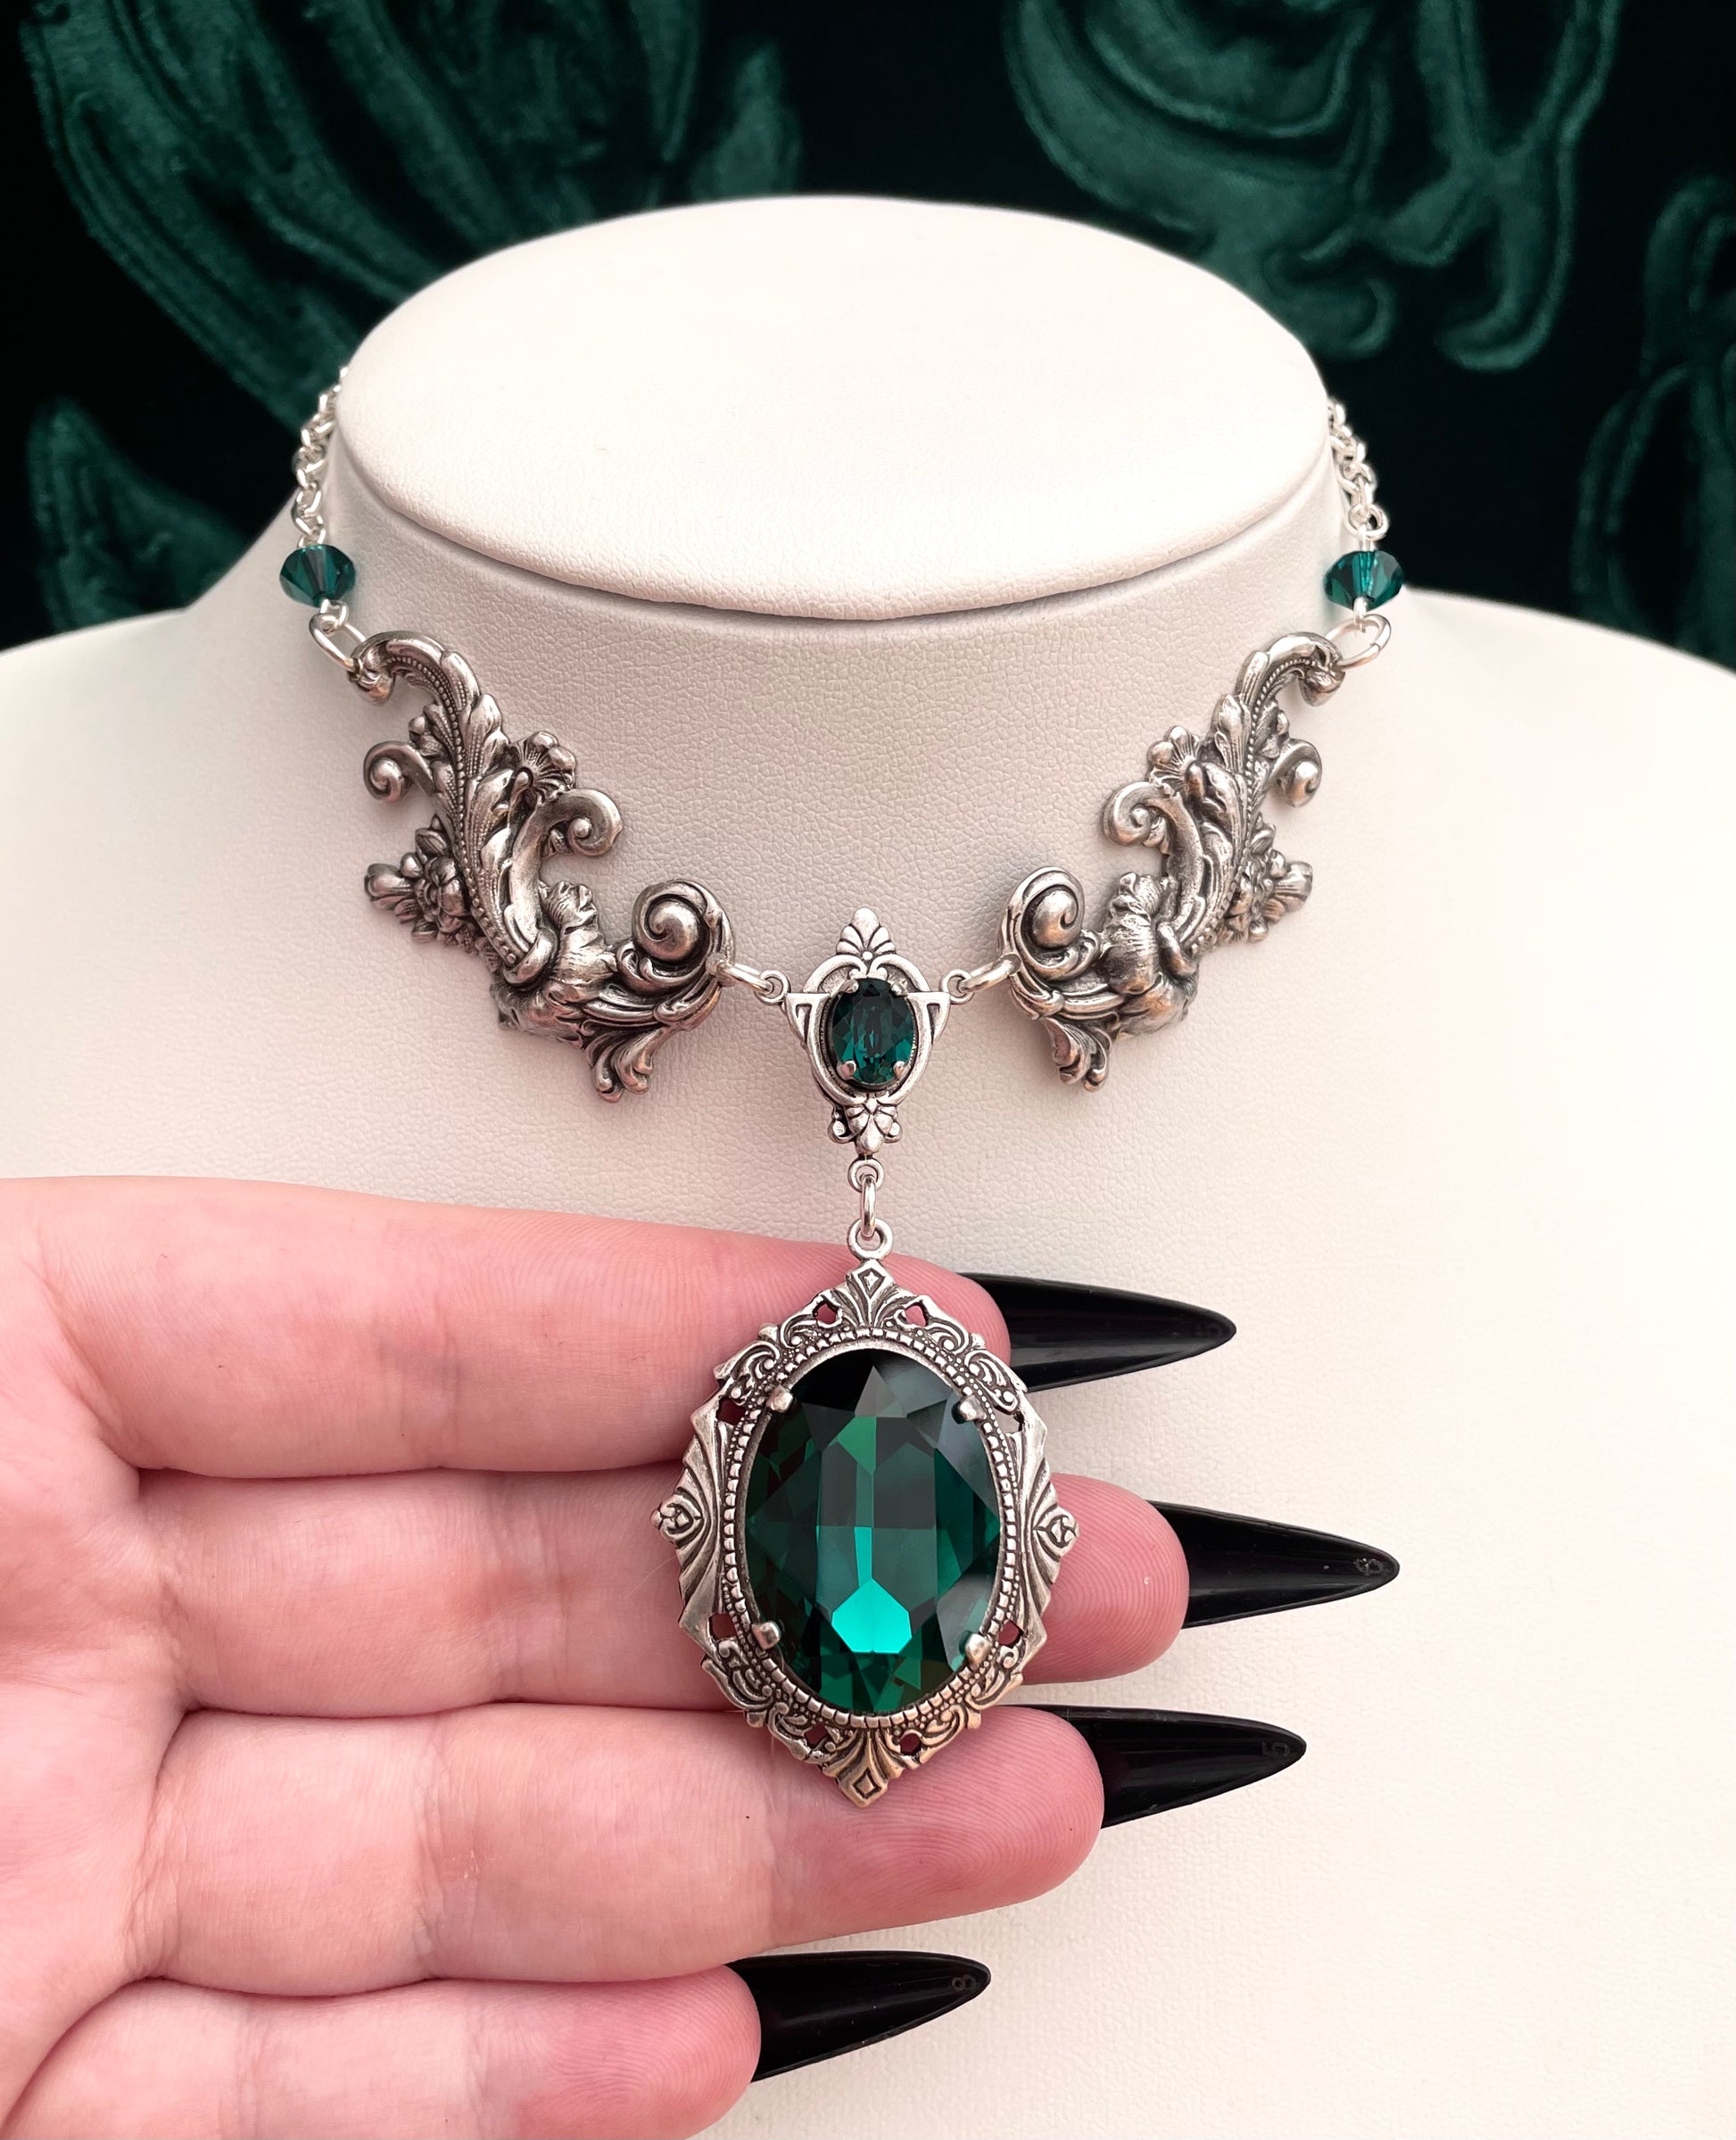 Emerald necklace, gothic emerald necklace, green and silver necklace, Slytherin necklace, Slytherin jewellery, Slytherin jewelry, victorian gothic necklace, victorian goth, victorian gothic necklace green, green gothic necklace, necklace with green jewels